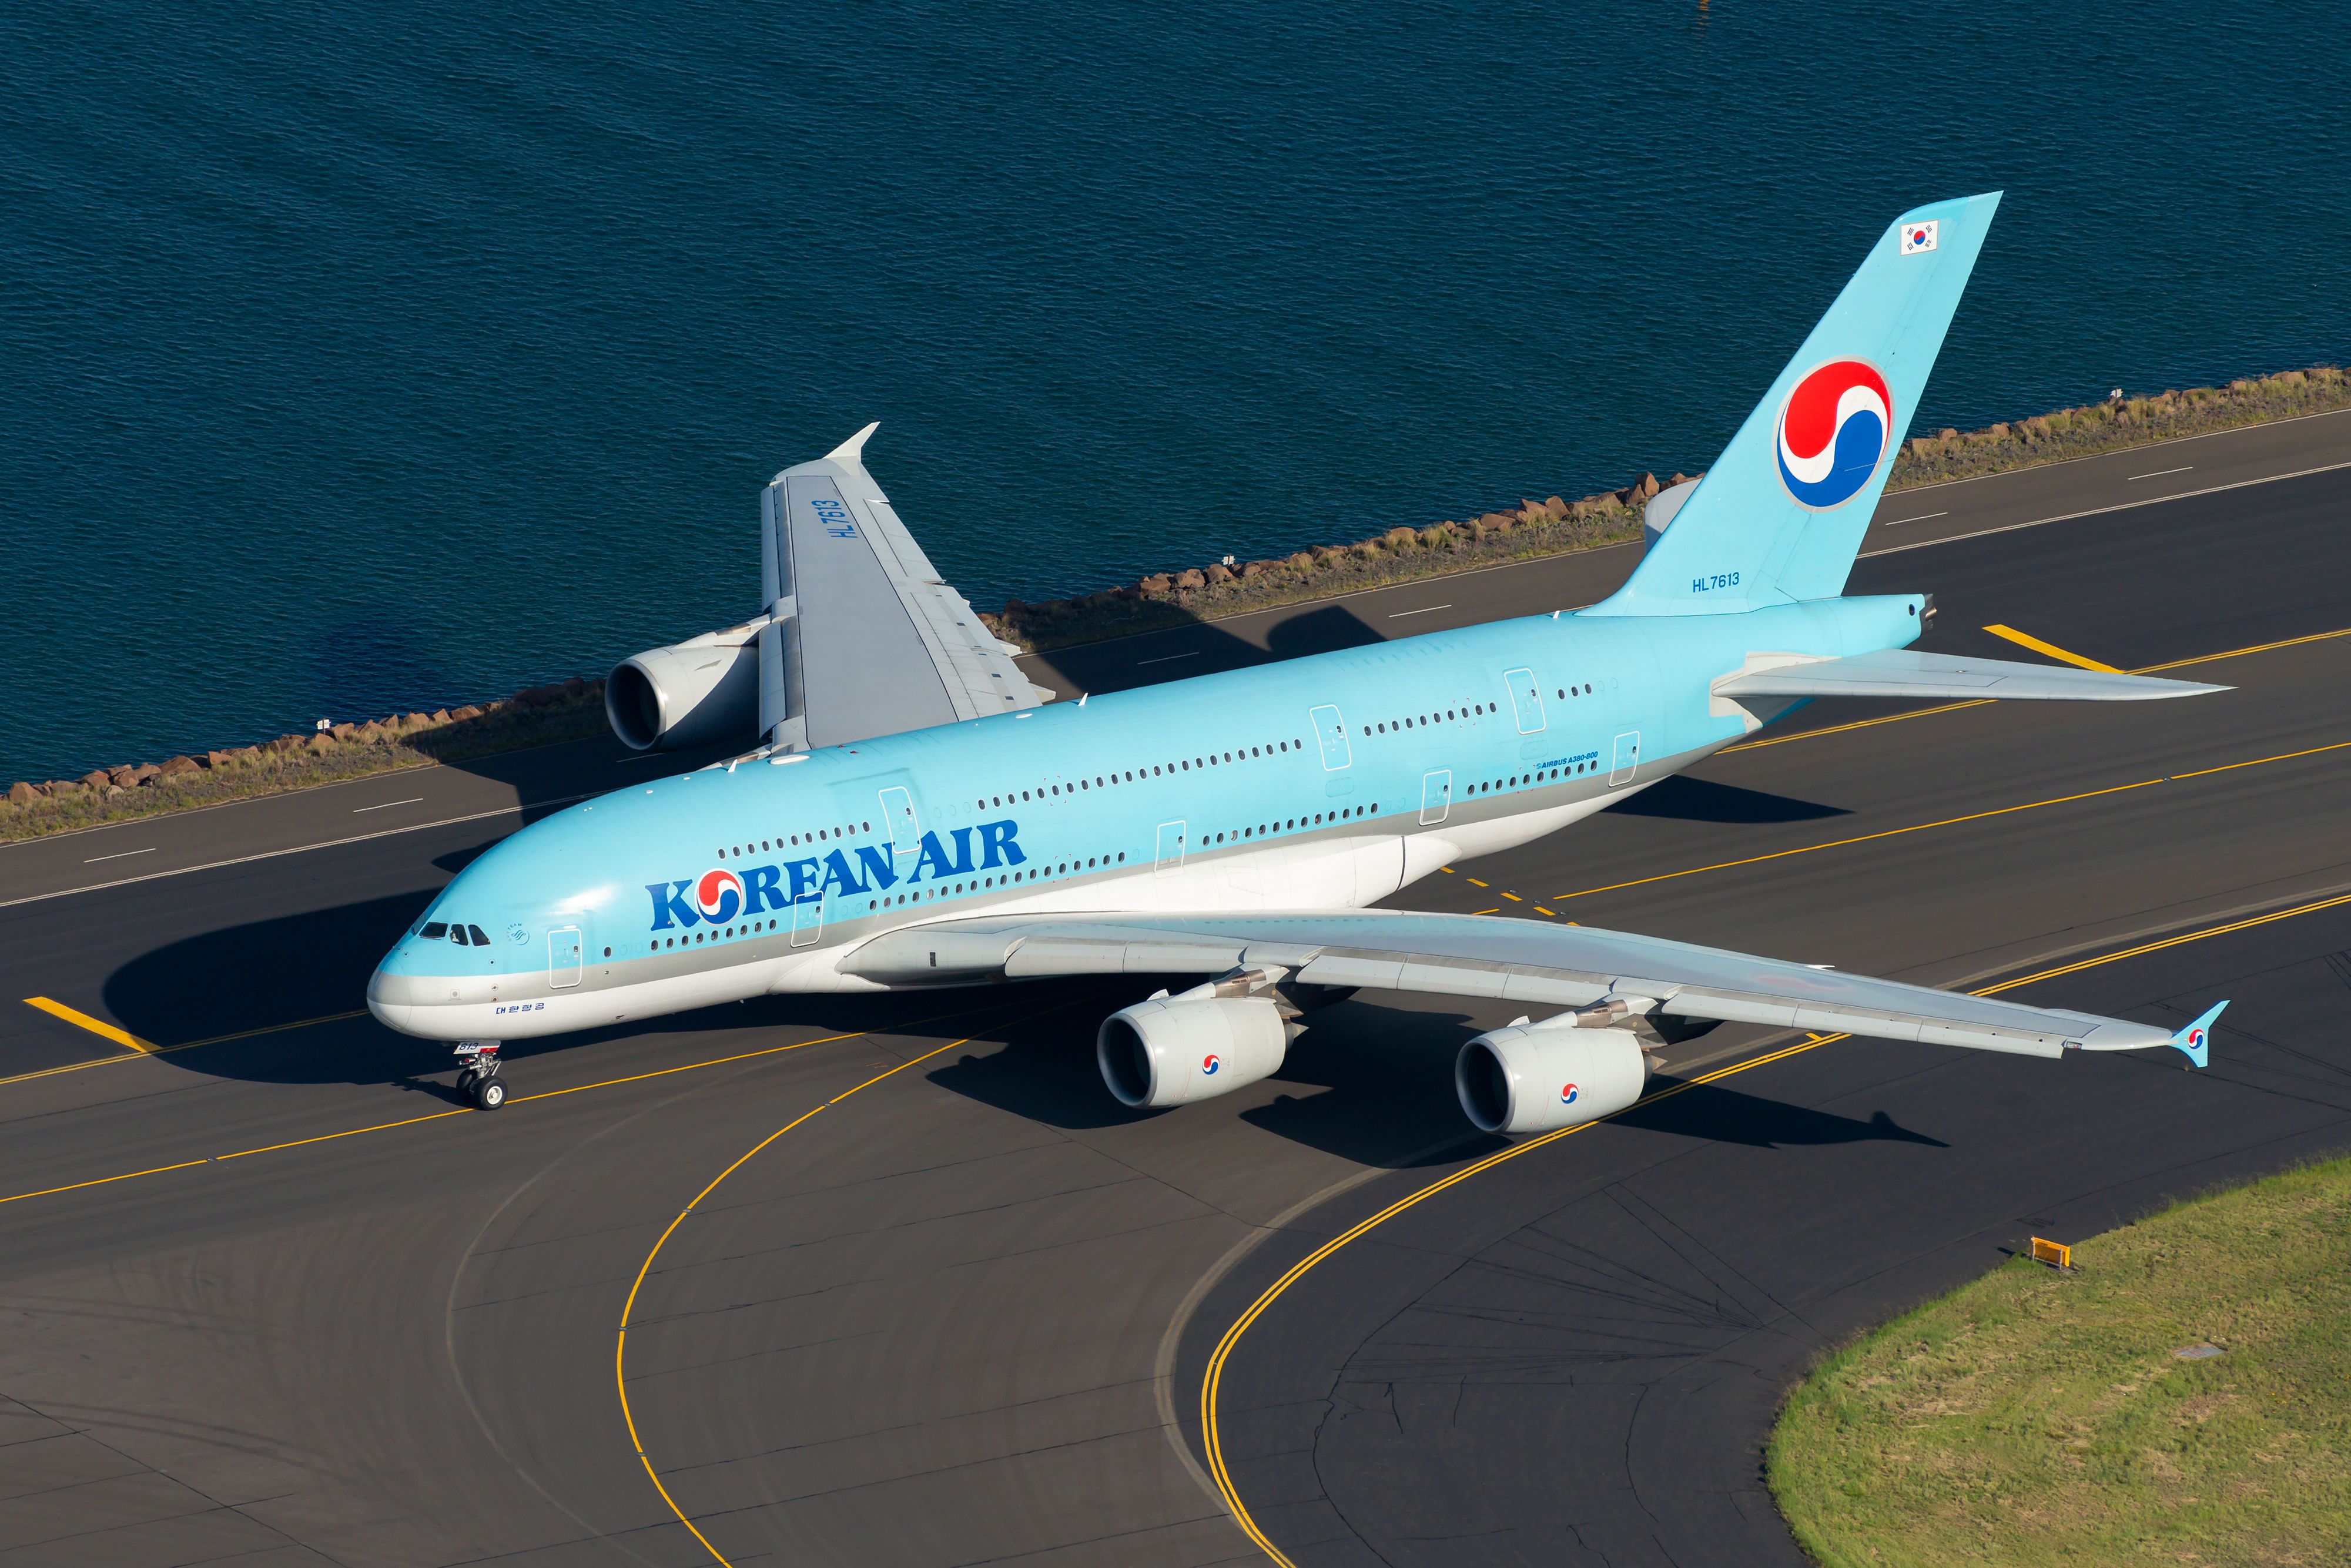 A Korean Airlines Airbus A380 on a runway.